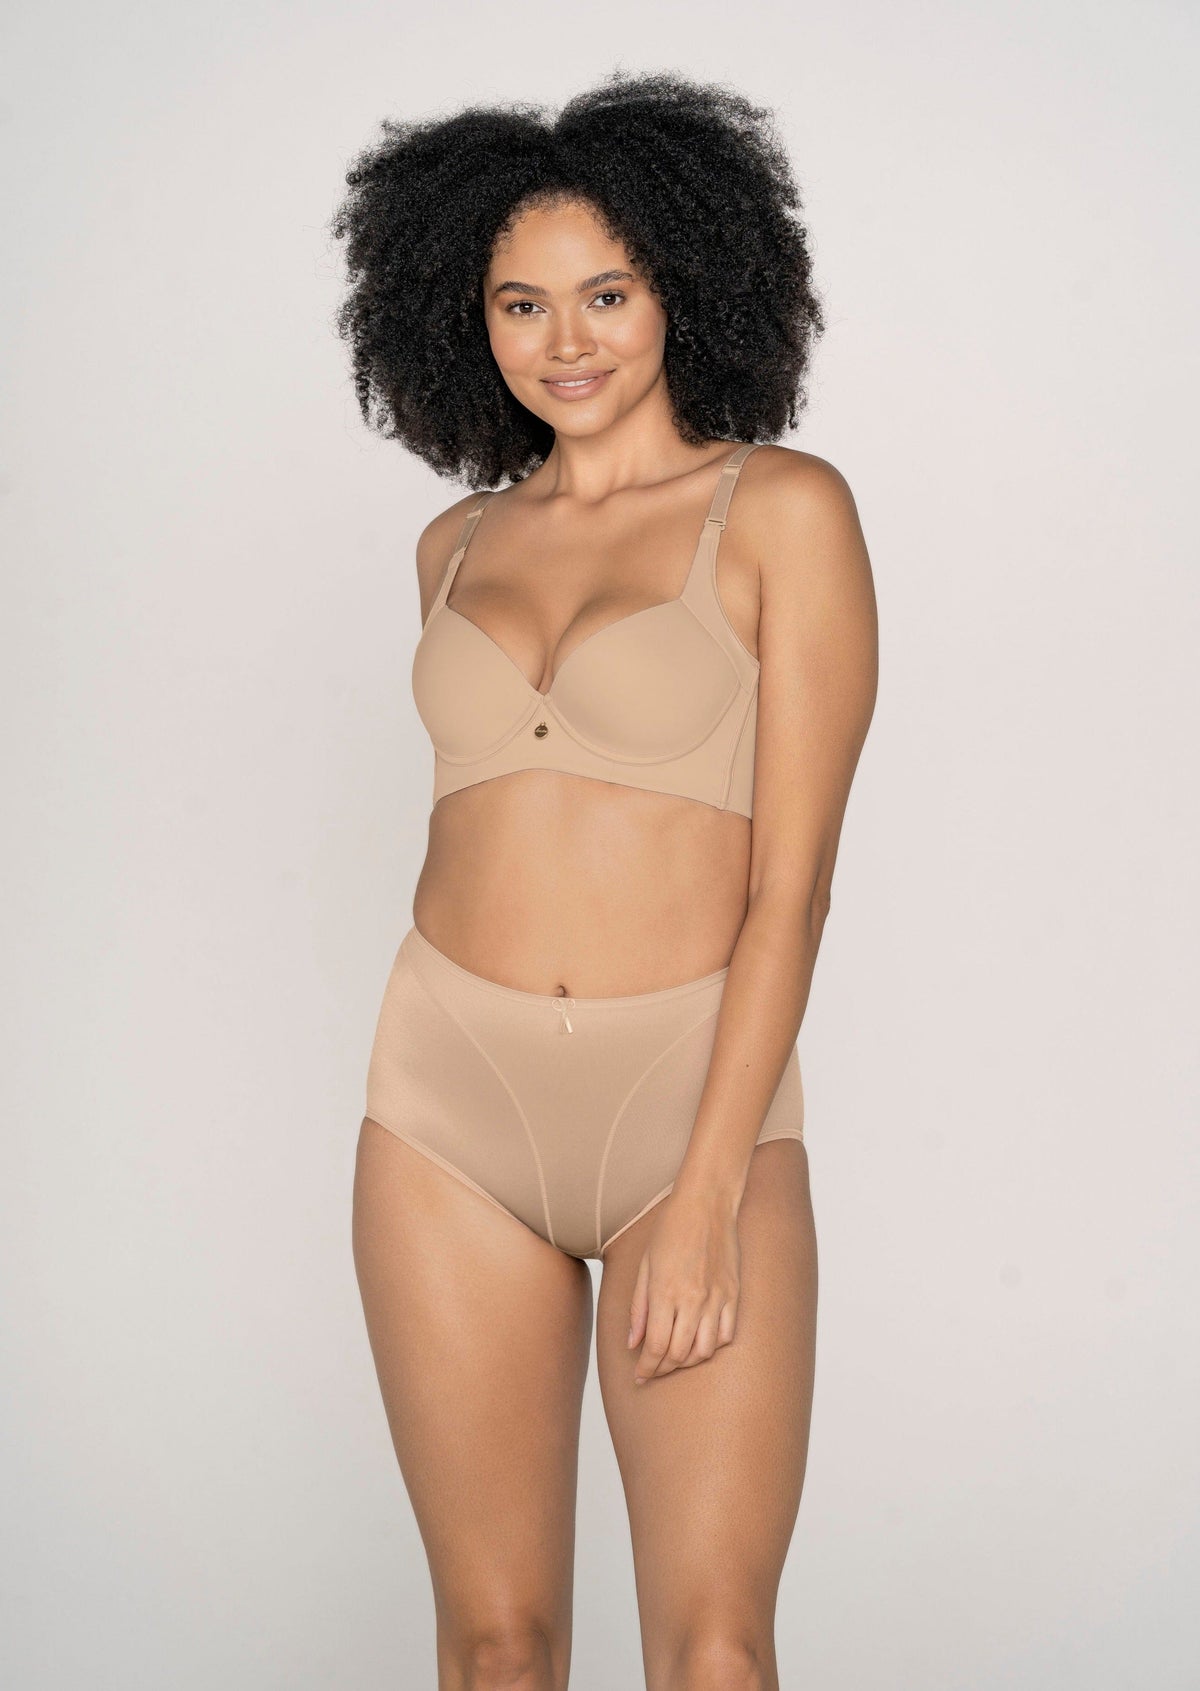 Leonisa Bras High Profile Back Smoothing Bra with Soft Full Coverage Cups - Nude